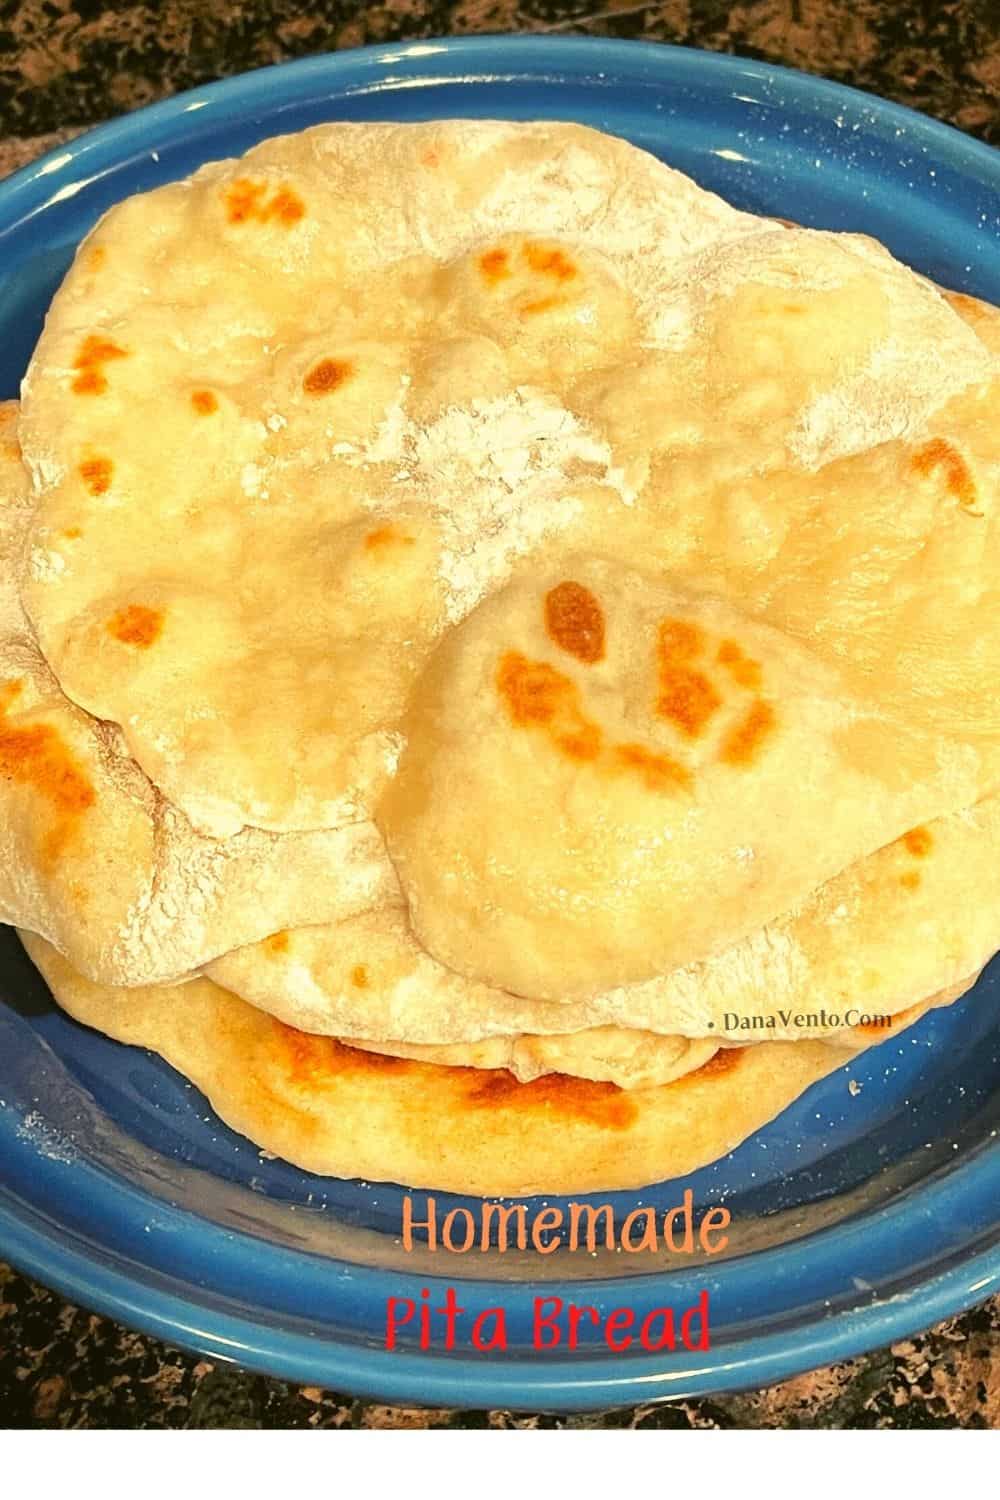 Homemade Pita bread in a frying pan